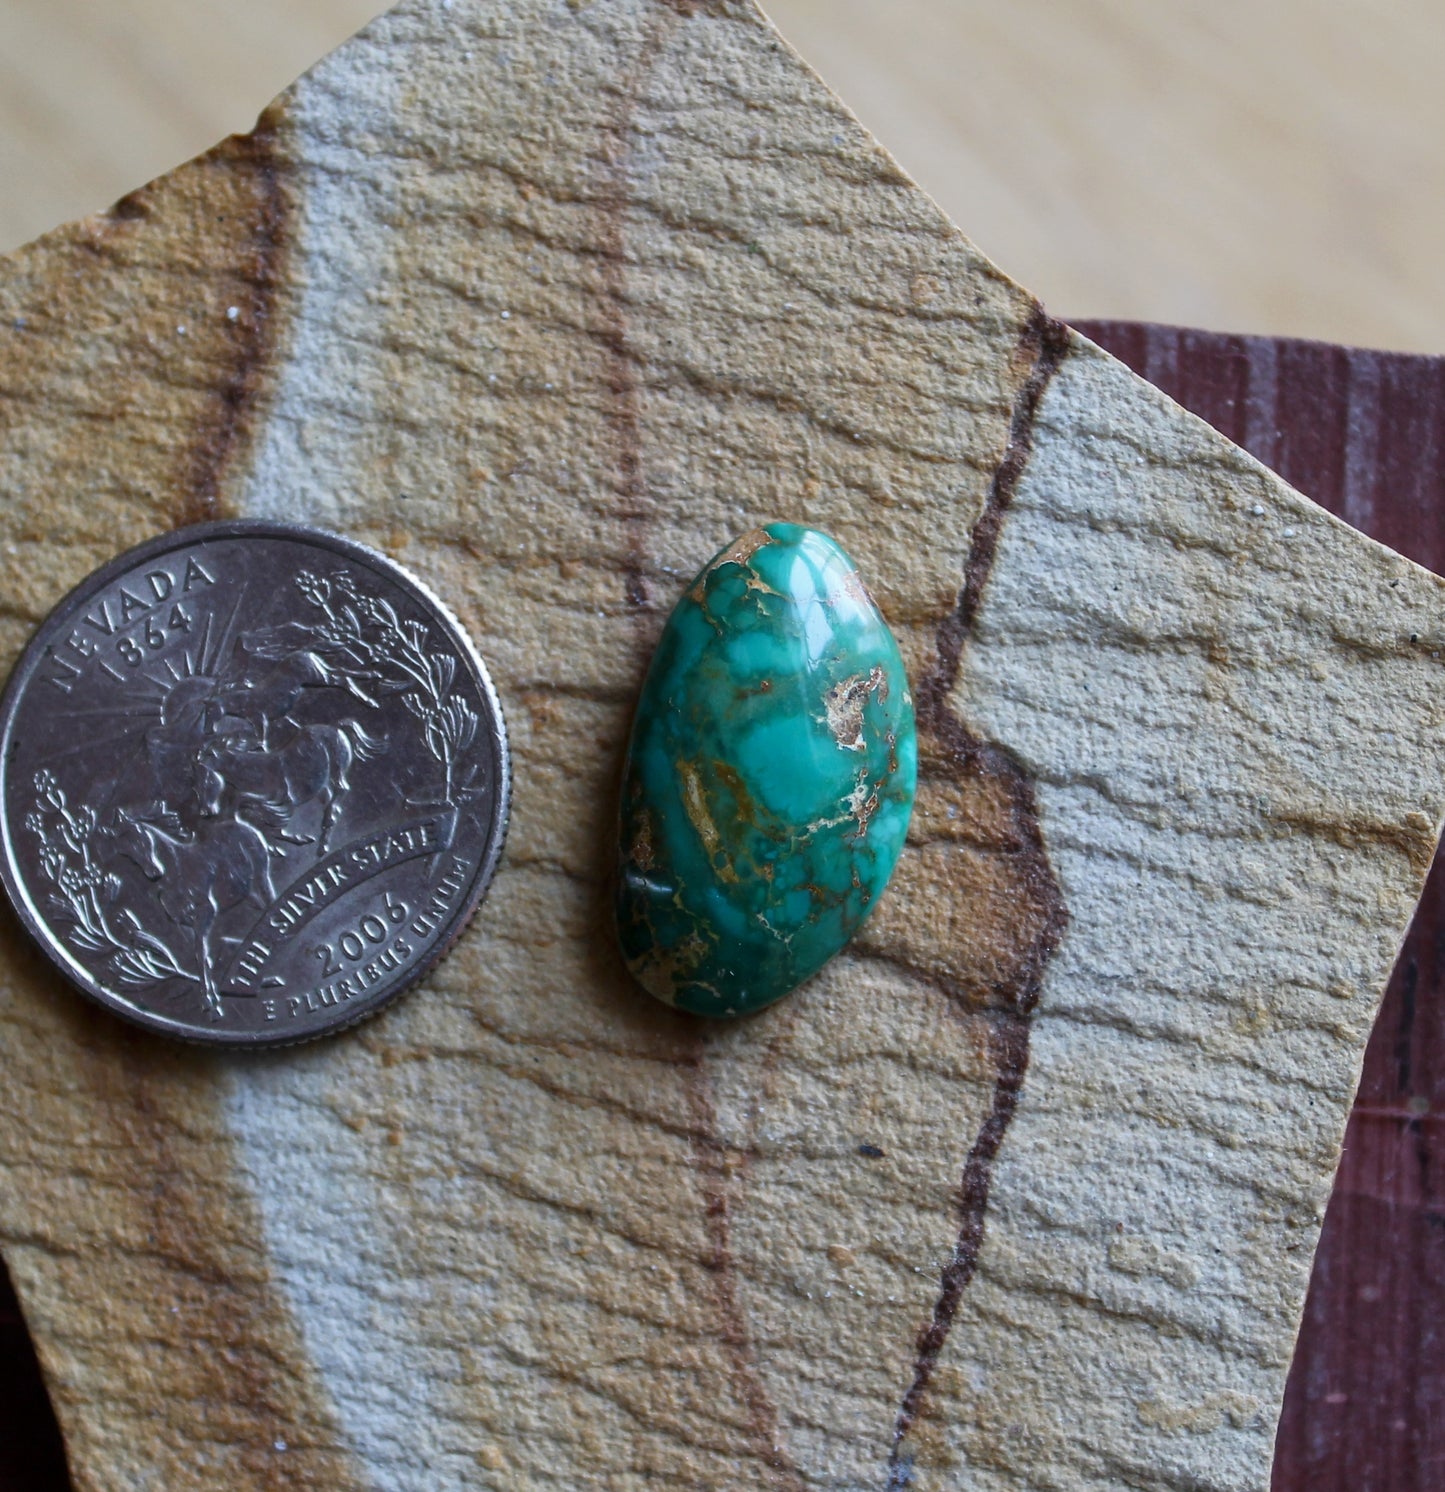 10 carat teal blue Stone Mountain Turquoise cabochon